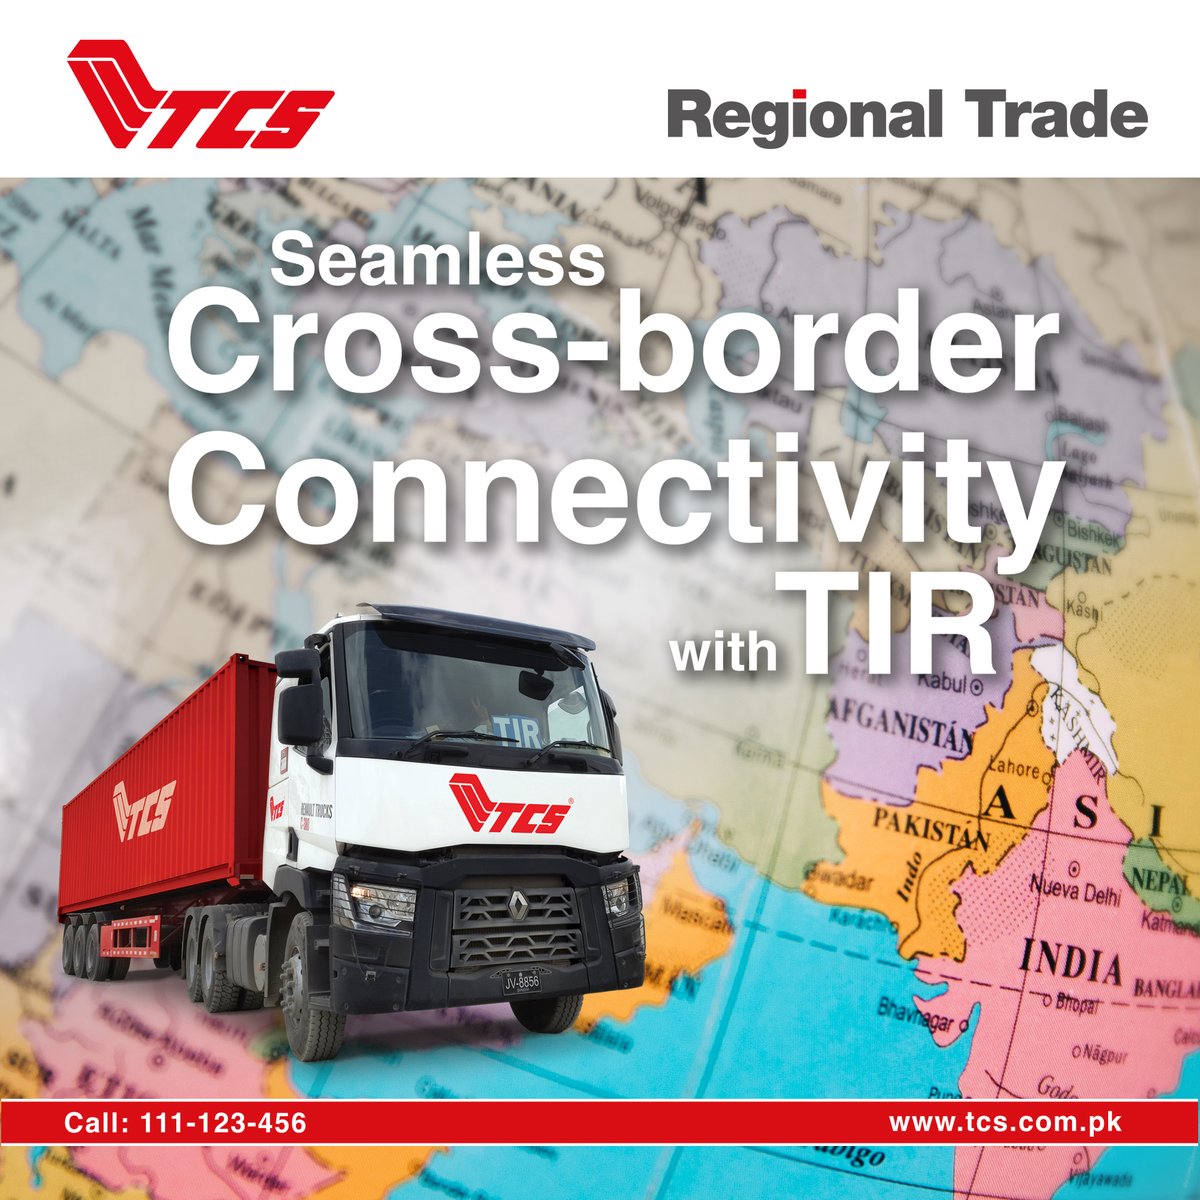 As the first authorized Transports Internationaux Routiers (TIR) operator in Pakistan, TCS can be your gateway to diversify and expand your business in Central Asia. Contact us today to learn more. #TCS #uzbekistan #UNECE #corridor #trading